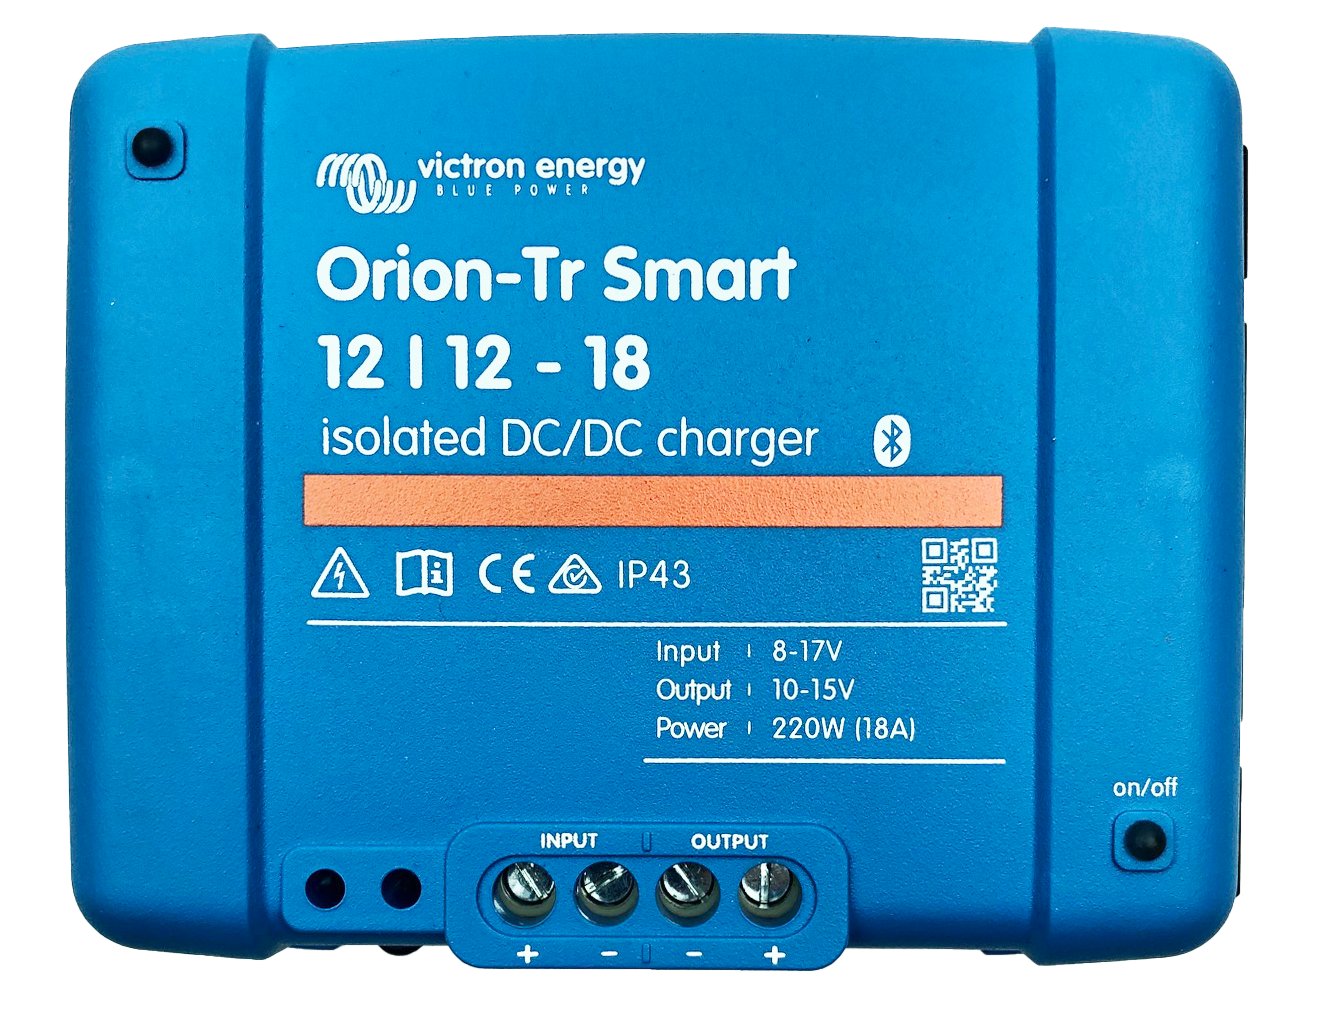 Do Orion Chargers come with programming guidance?